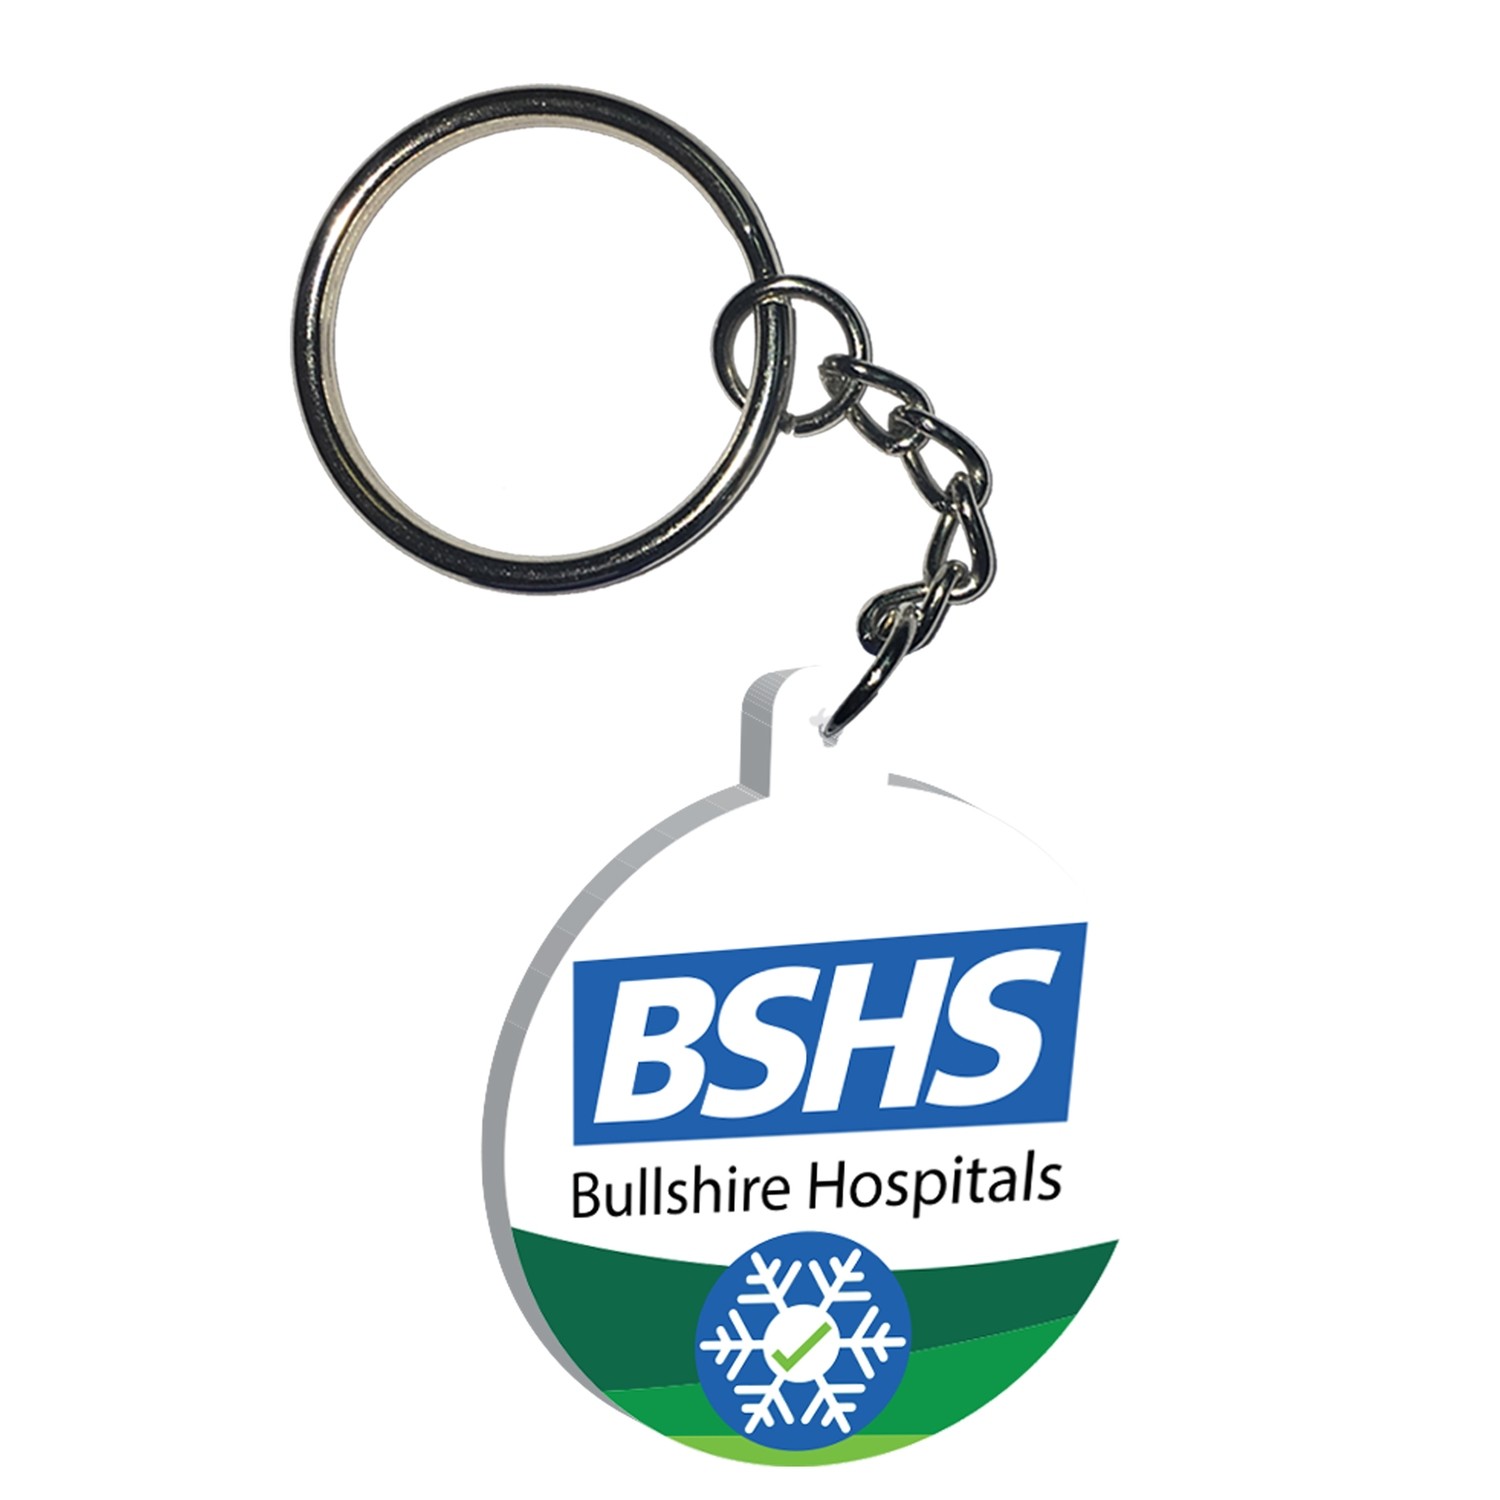 'BSHS Hospitals' Silicone Rubber Key Ring